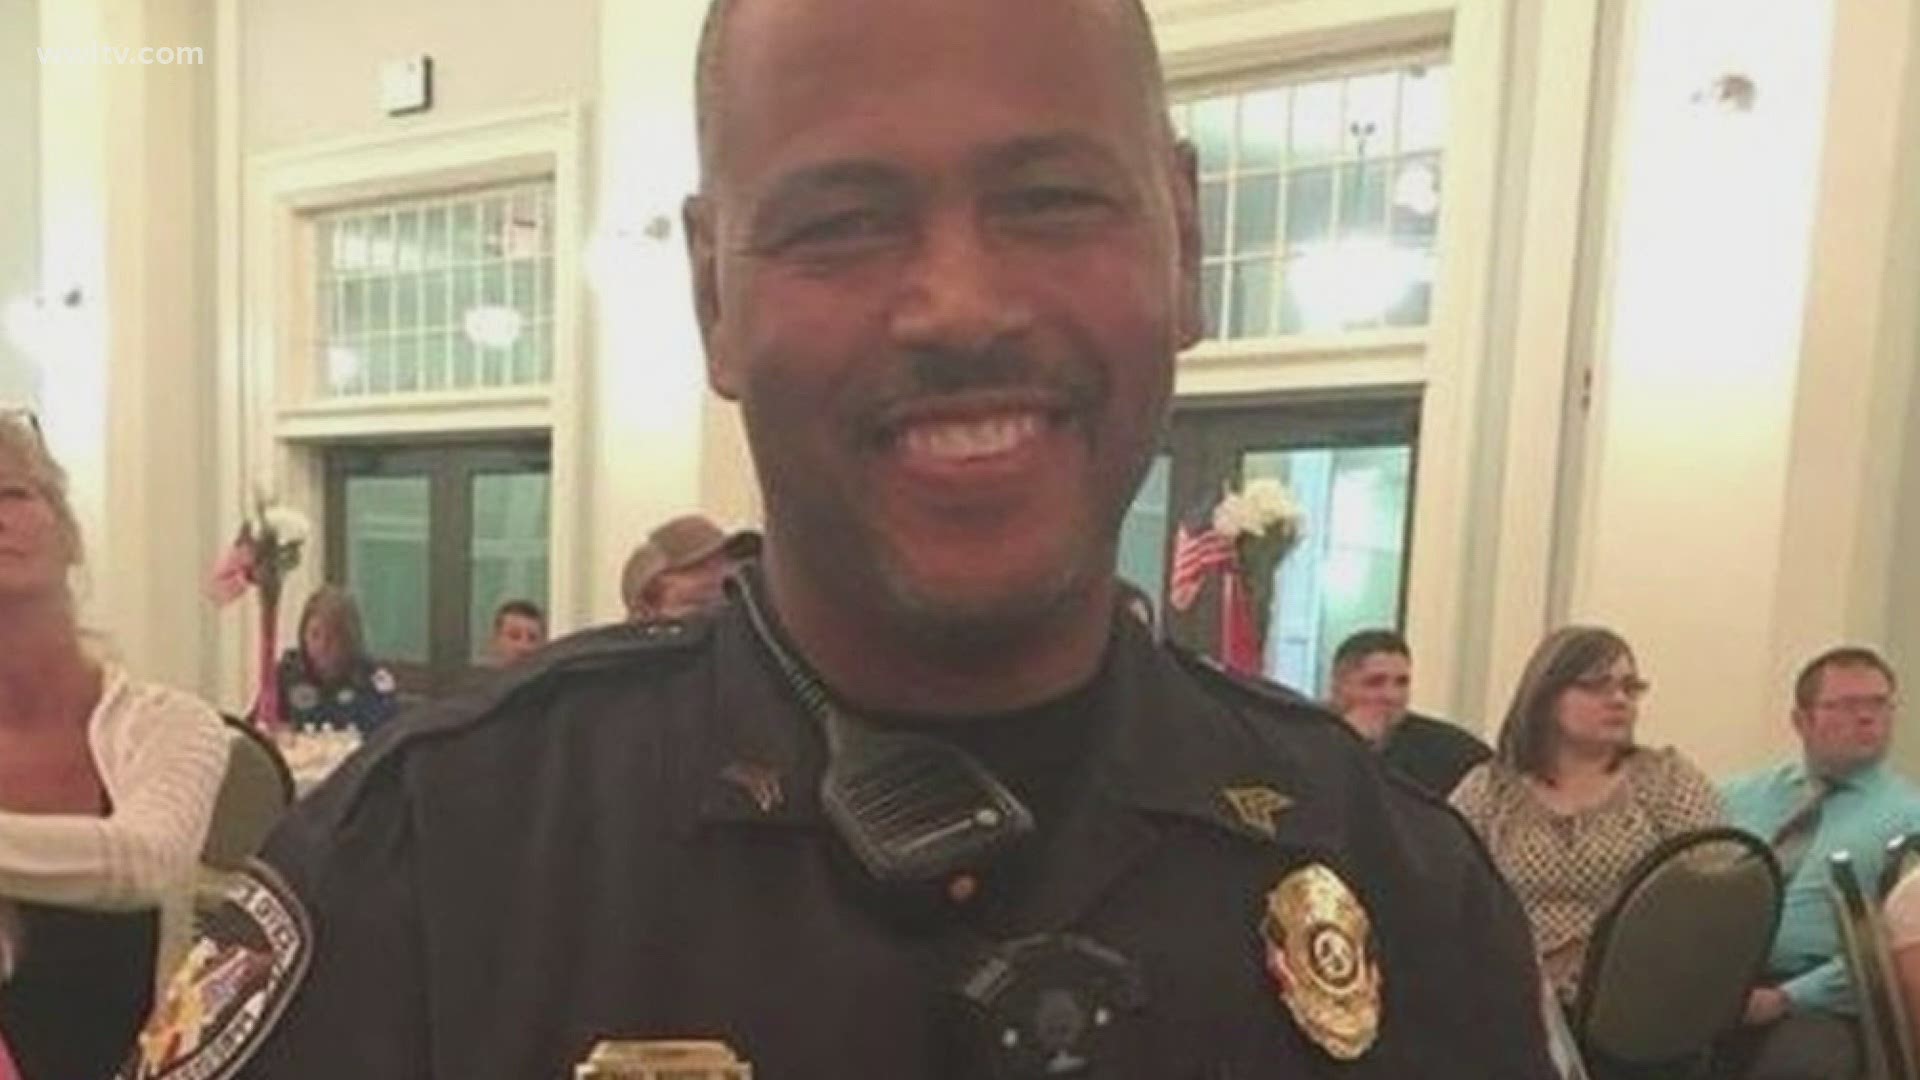 Hancock County Lieutenant Michael Boutte was shot and killed while responding to a call of a disturbance at a home.